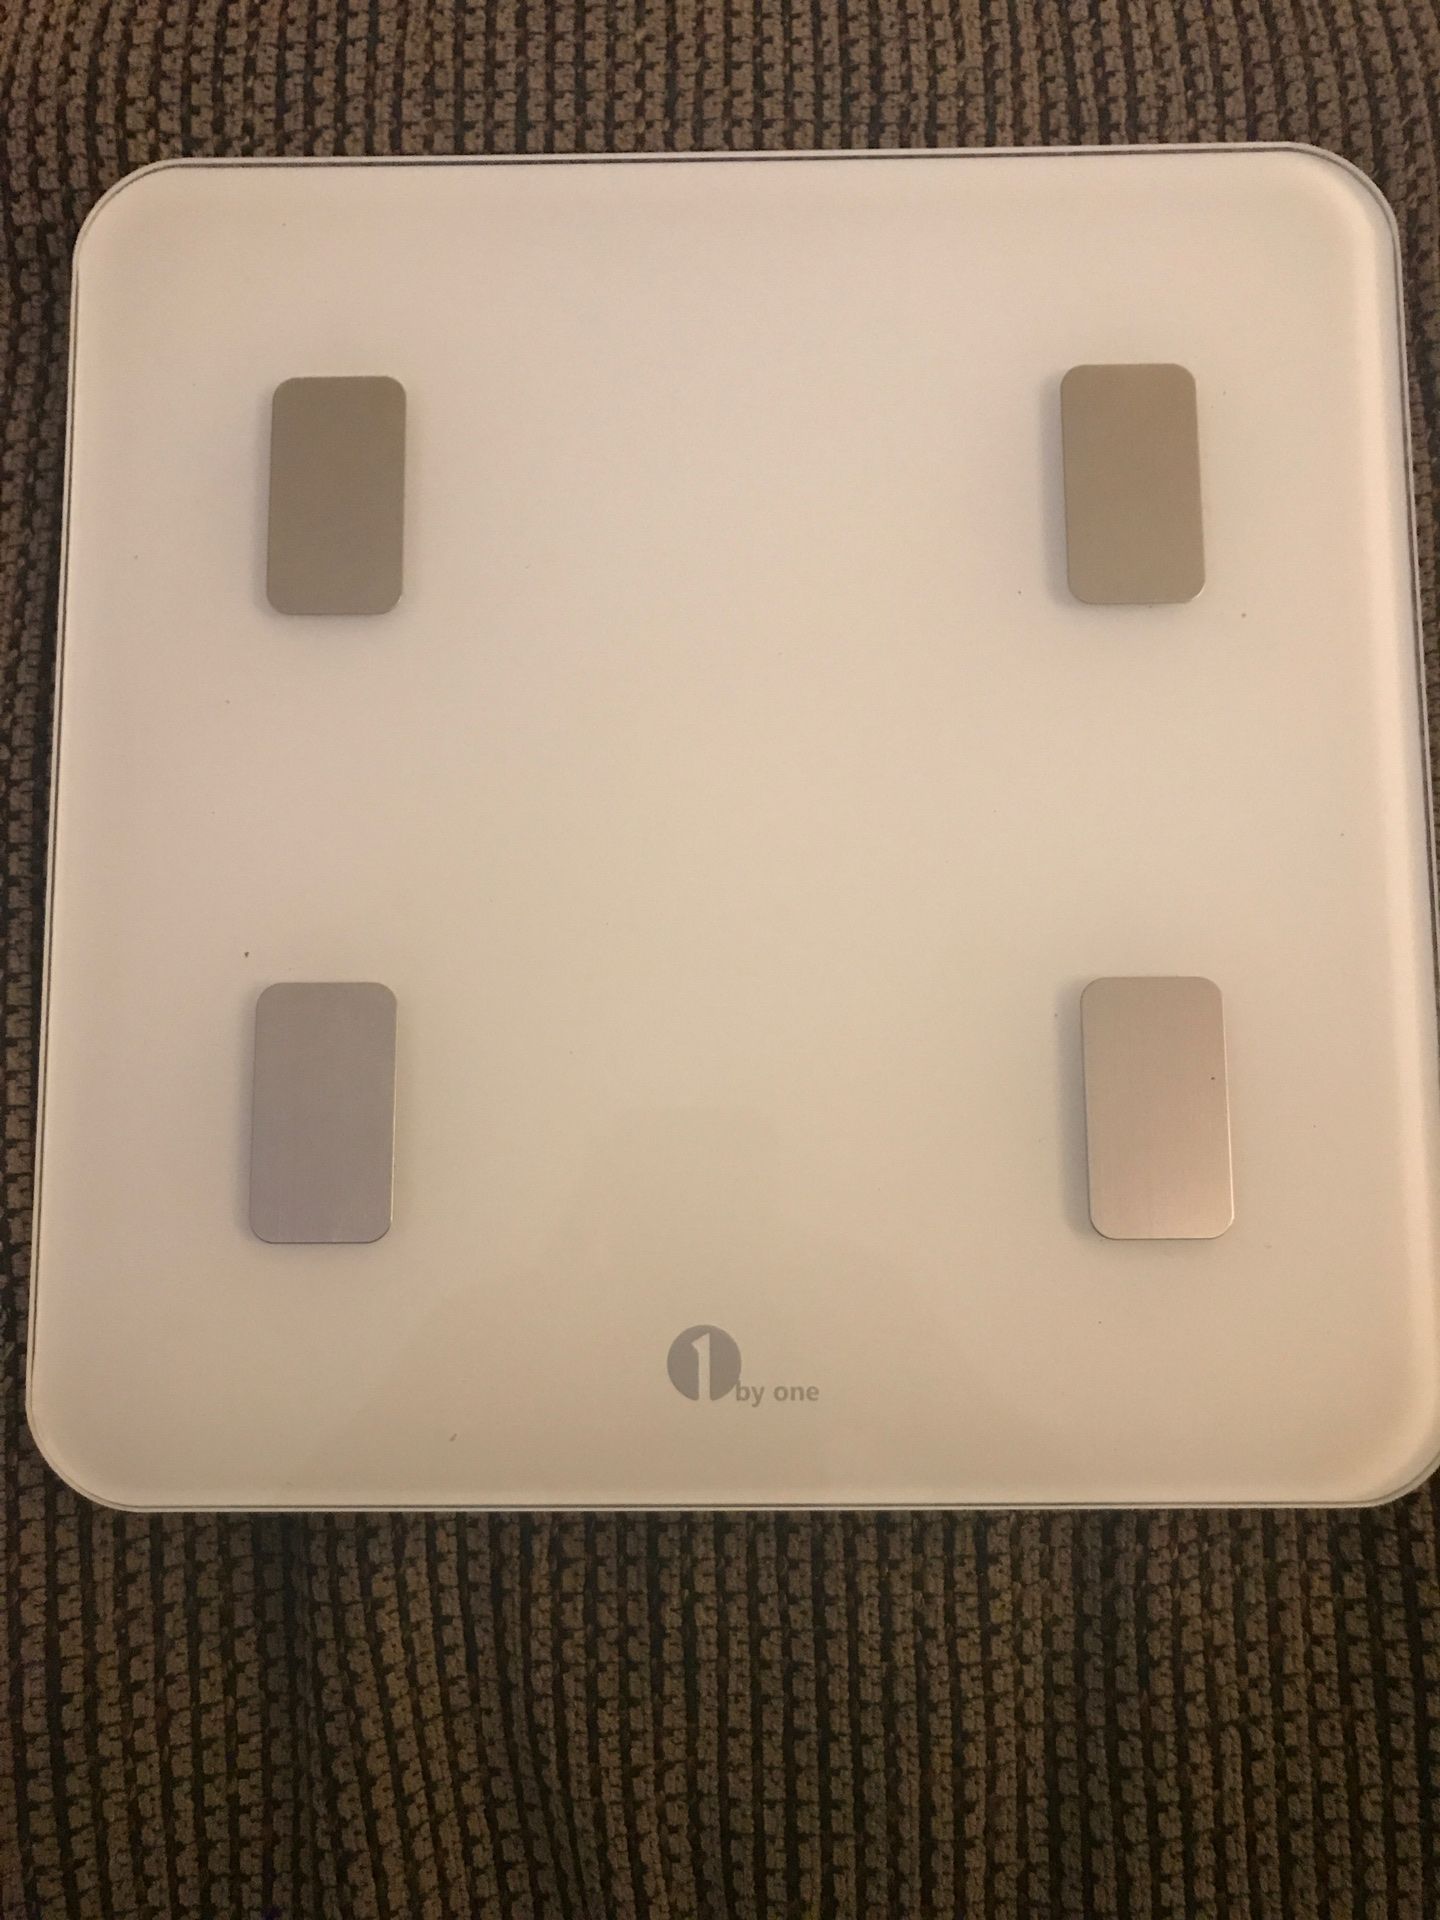 Weight Scale / 1byOne health